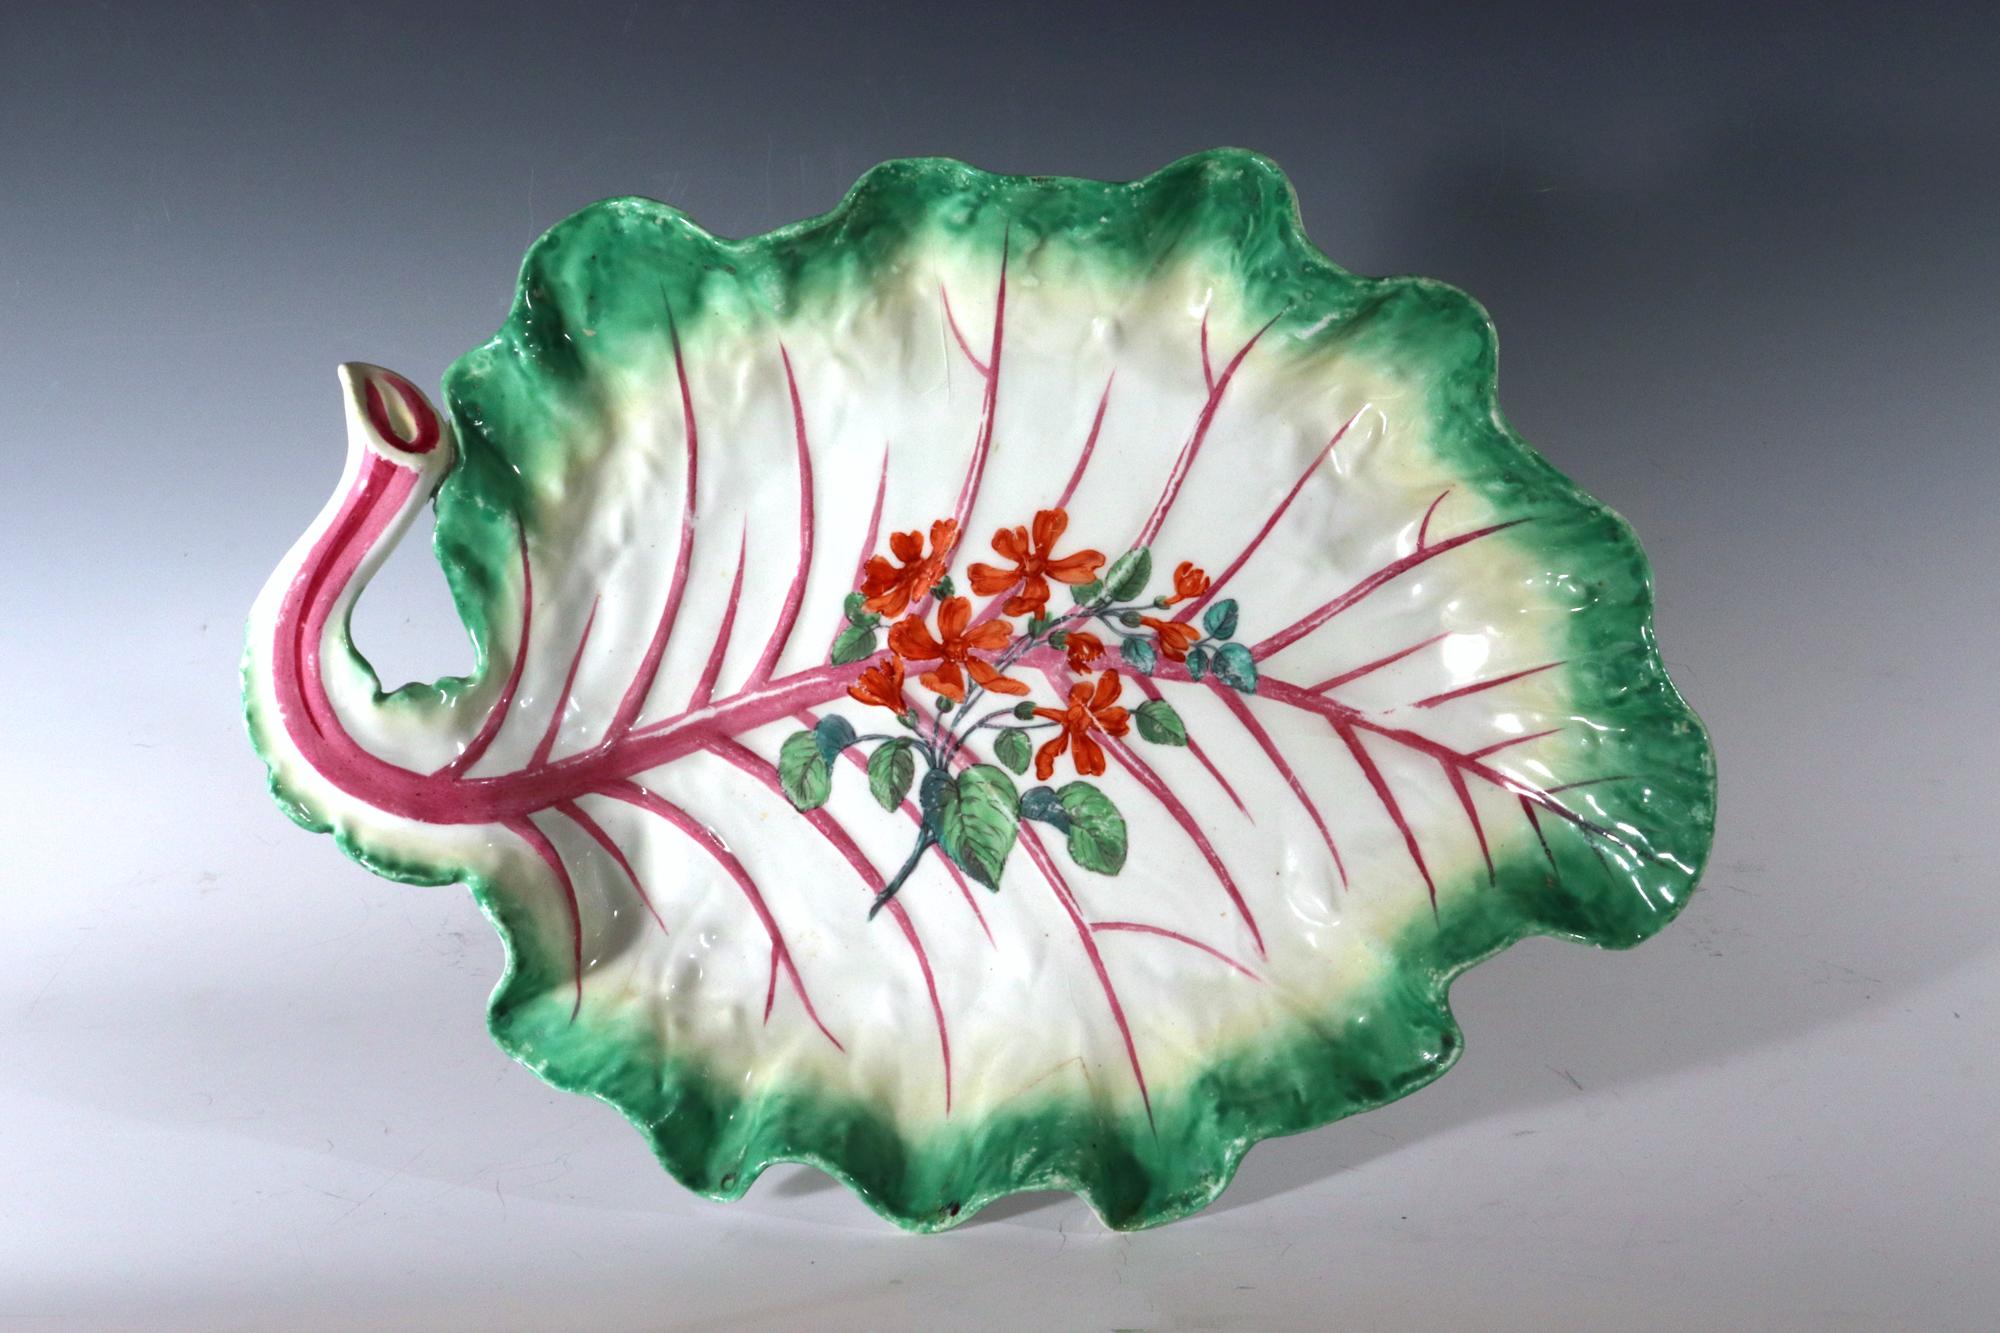 Chelsea Porcelain Botanical Dish,
Brown Anchor Period
circa 1758-60

The large red anchor period Chelsea Porcelain tromp l'oeil leaf dish is naturally colored and modelled as an open cabbage leaf with a curved stem issuing puce moulded veins,